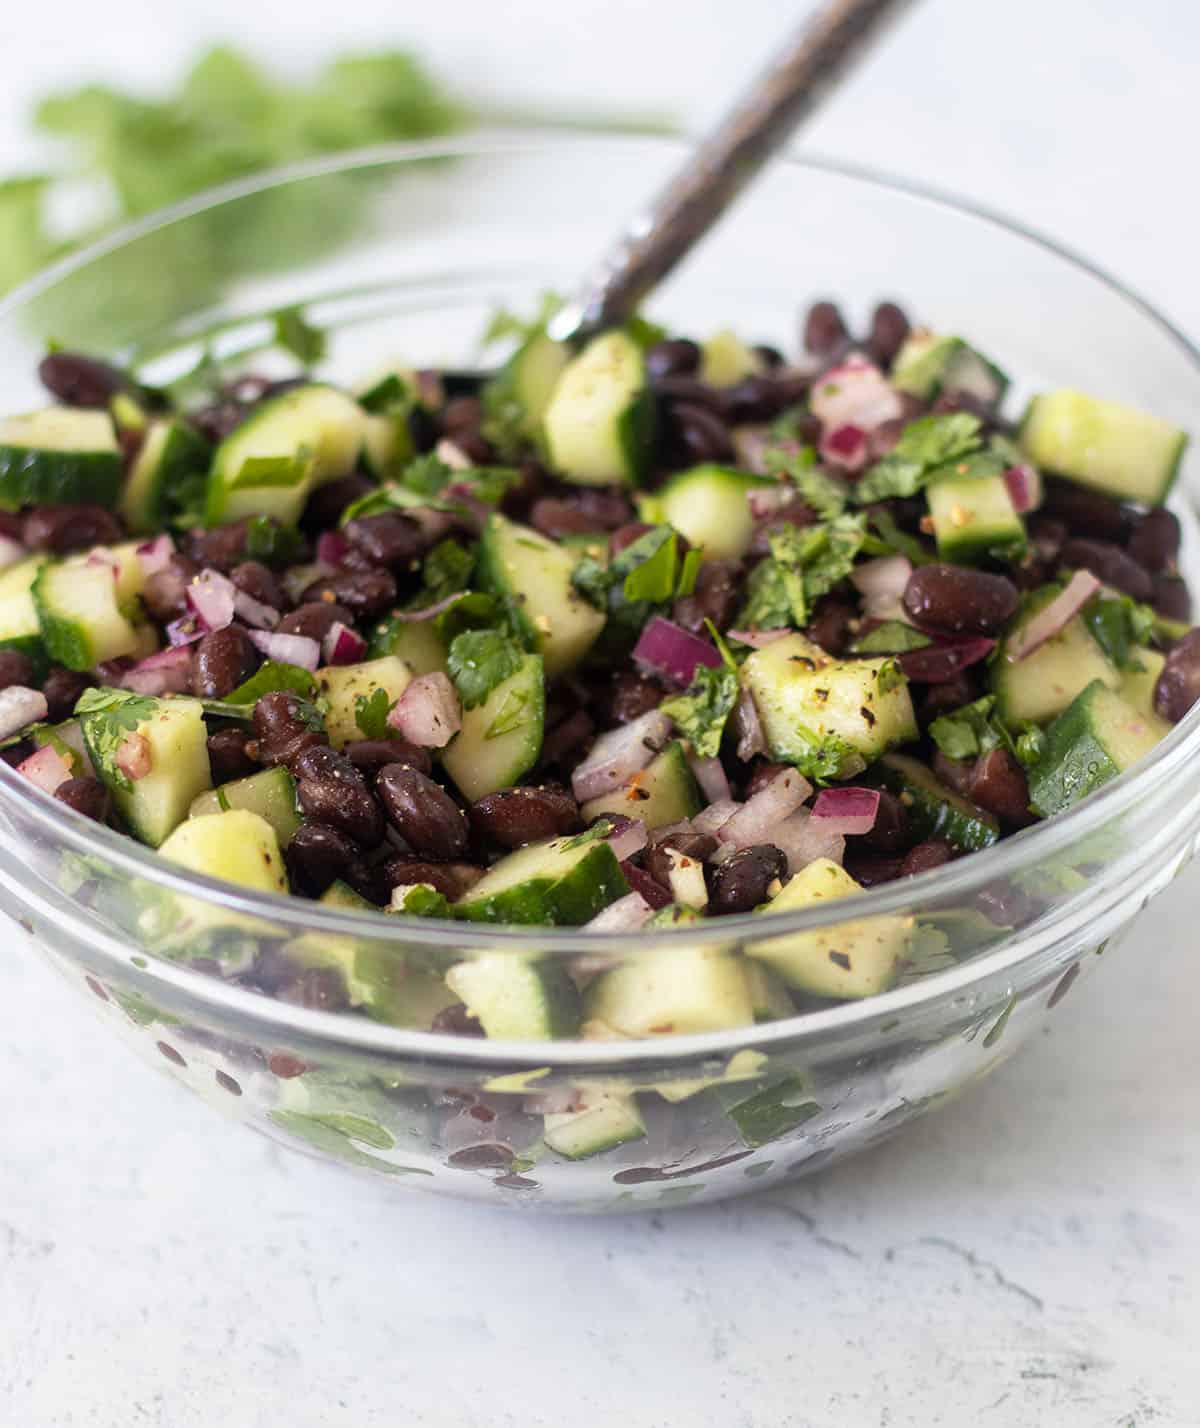 Cucumber black bean salad in glass bowl with silver spoon for serving.